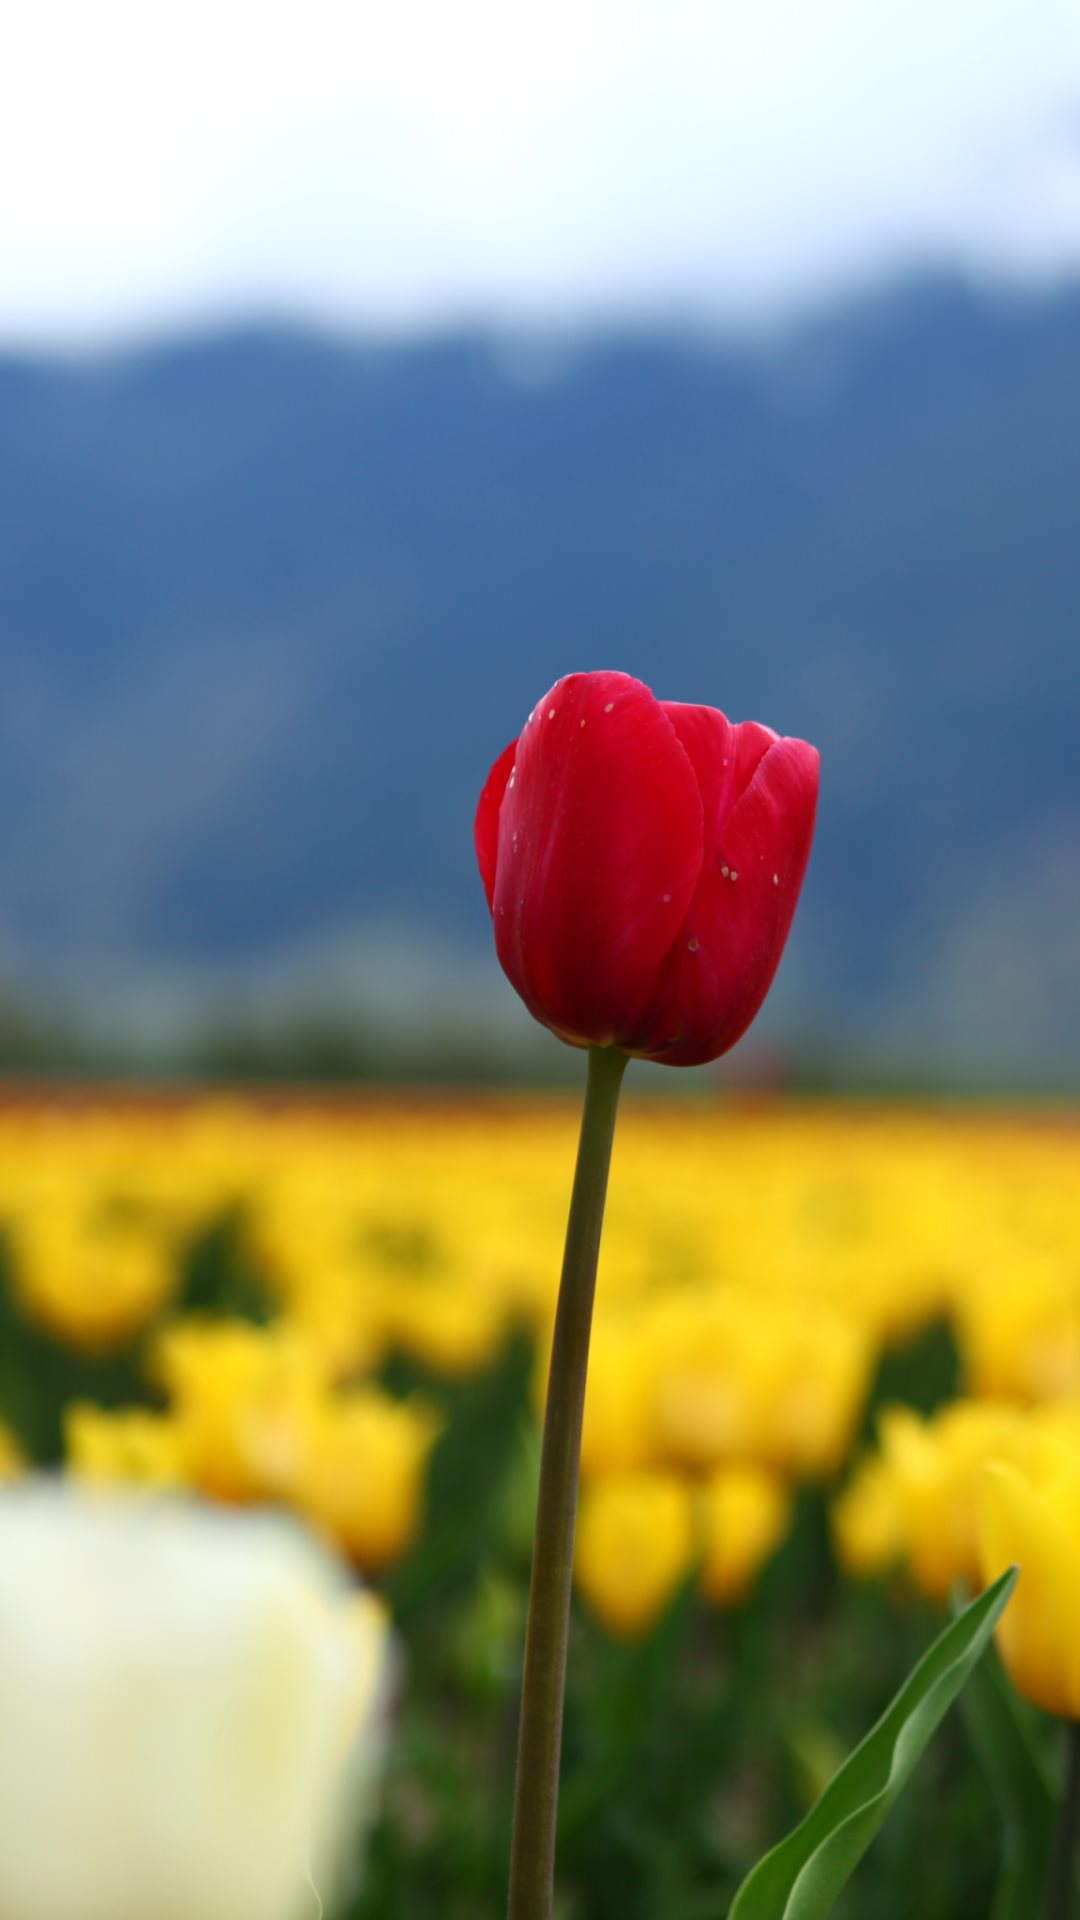 1080x1920 Red tulip htc one wallpaper Best htc one wallpapers